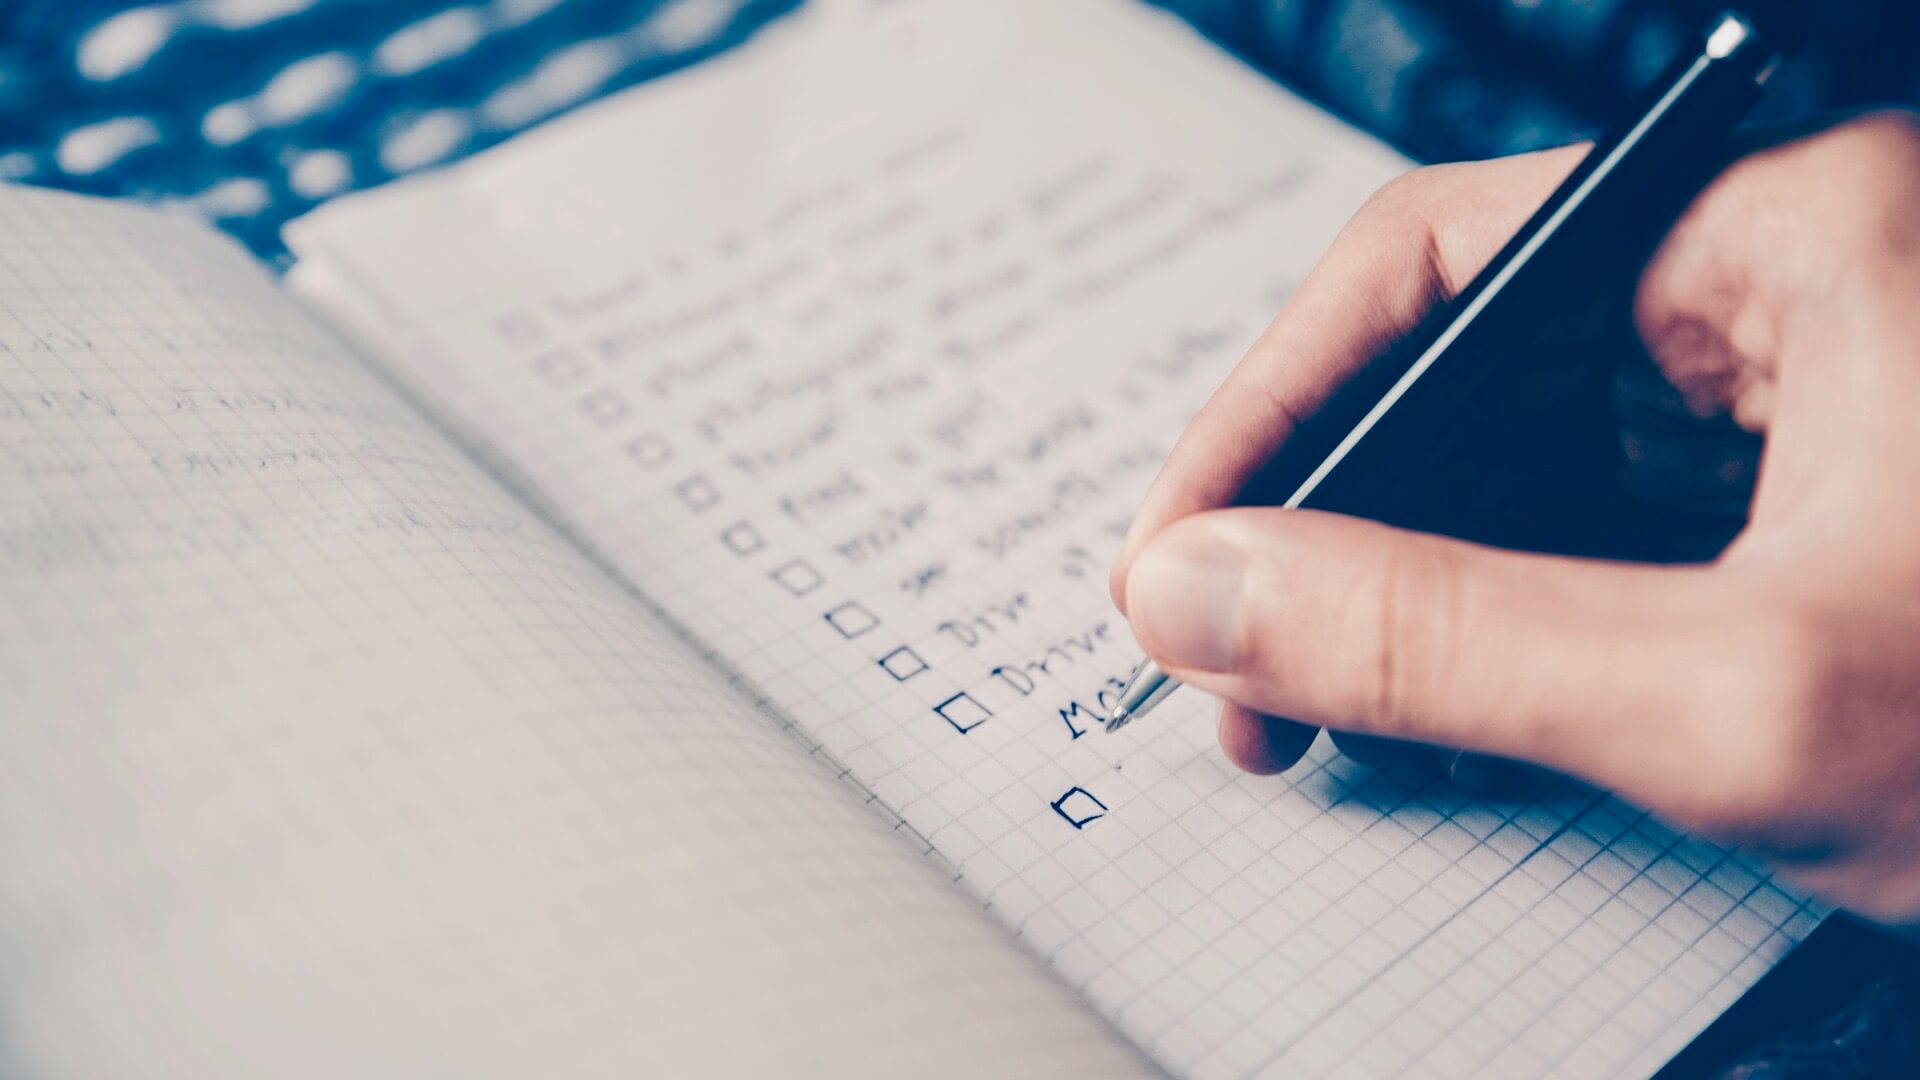 4 Steps to Mastering Your To-Do List